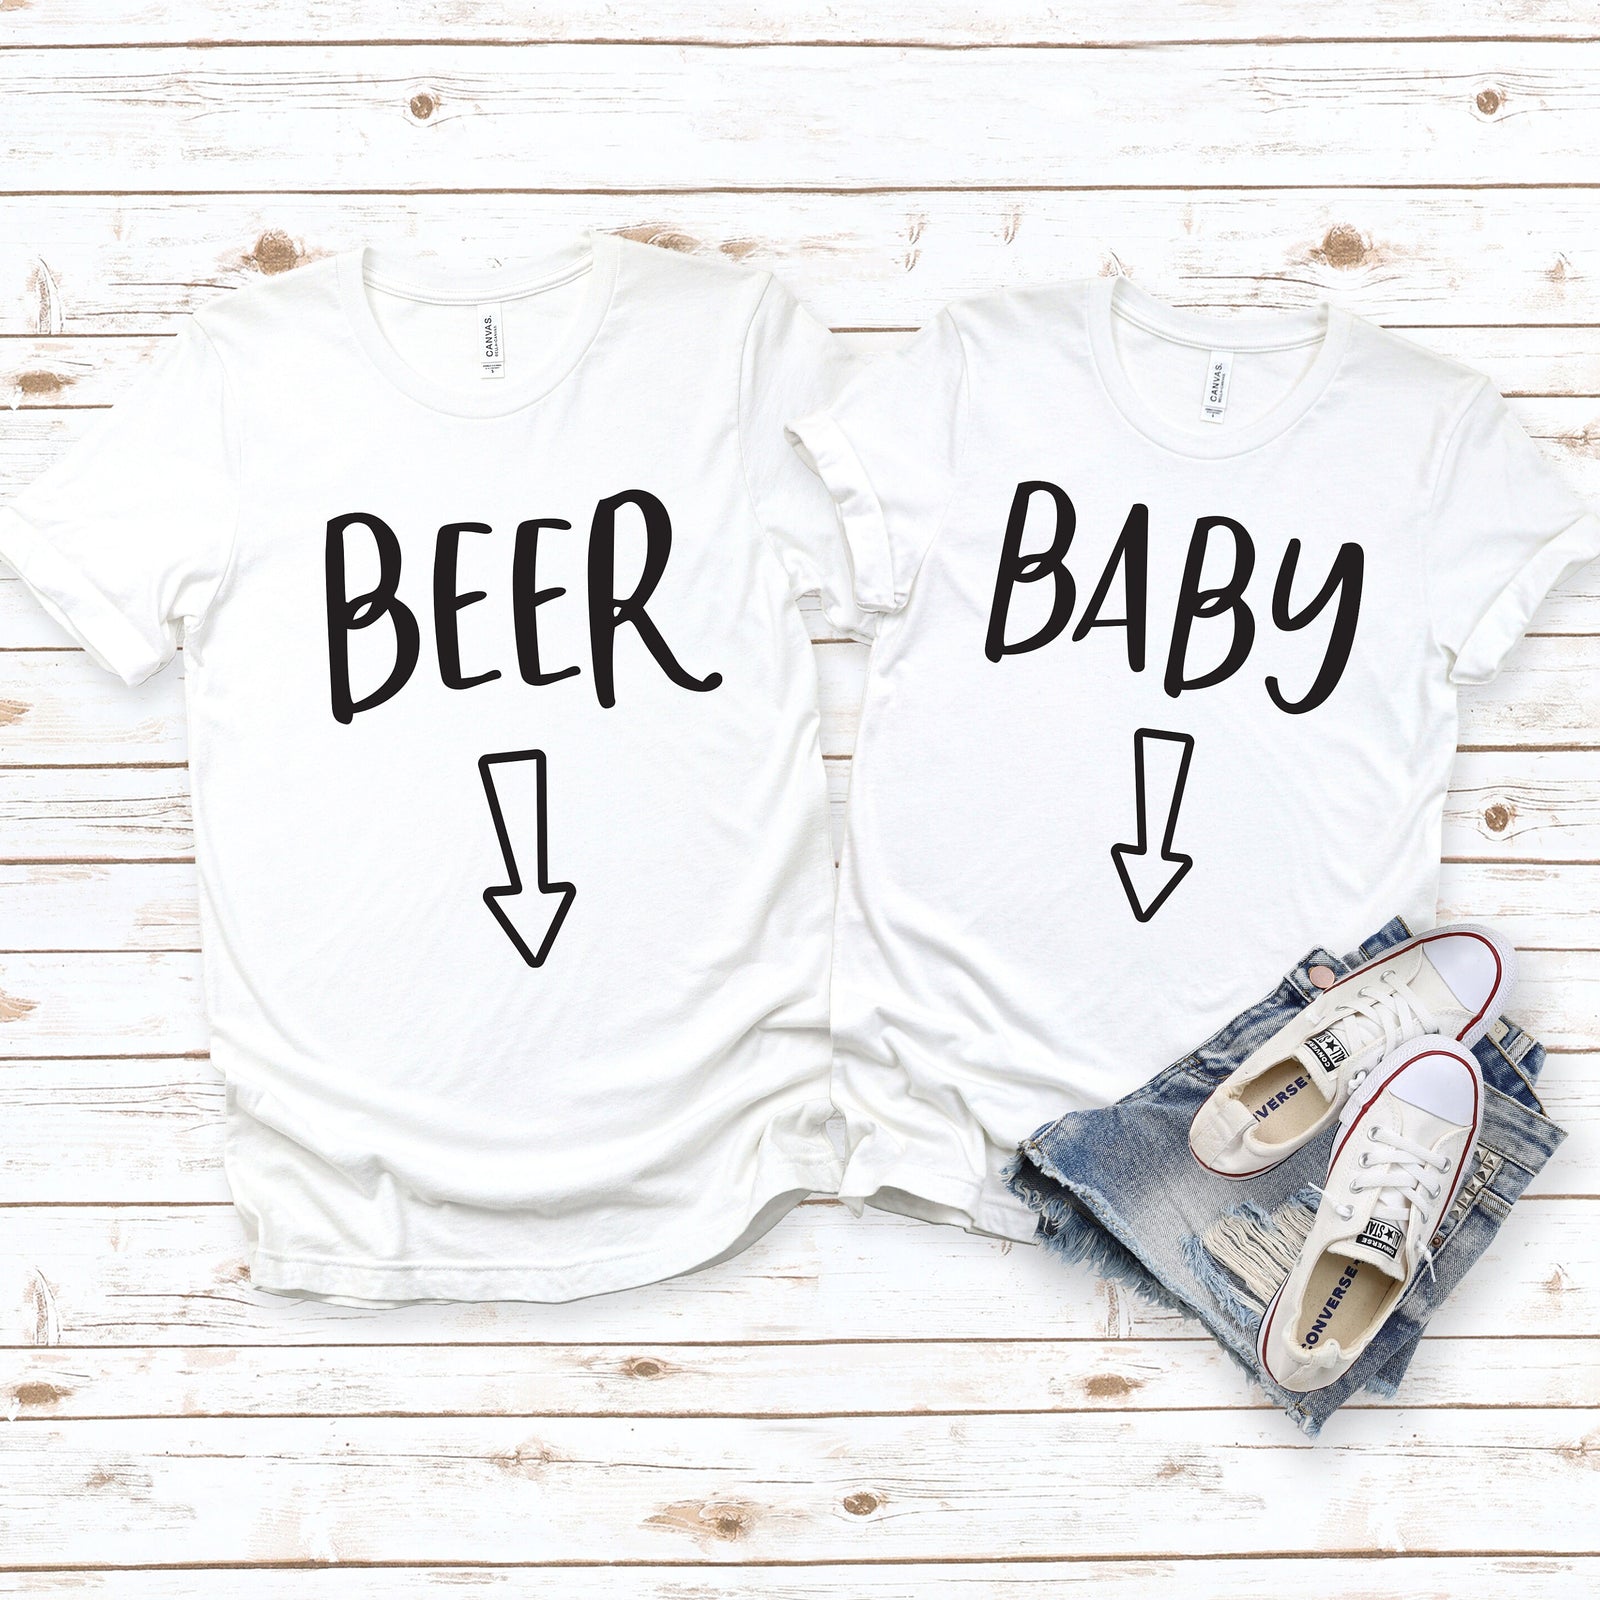 Baby and Beer T Shirts -Matching Shirts - Cute Pregnancy